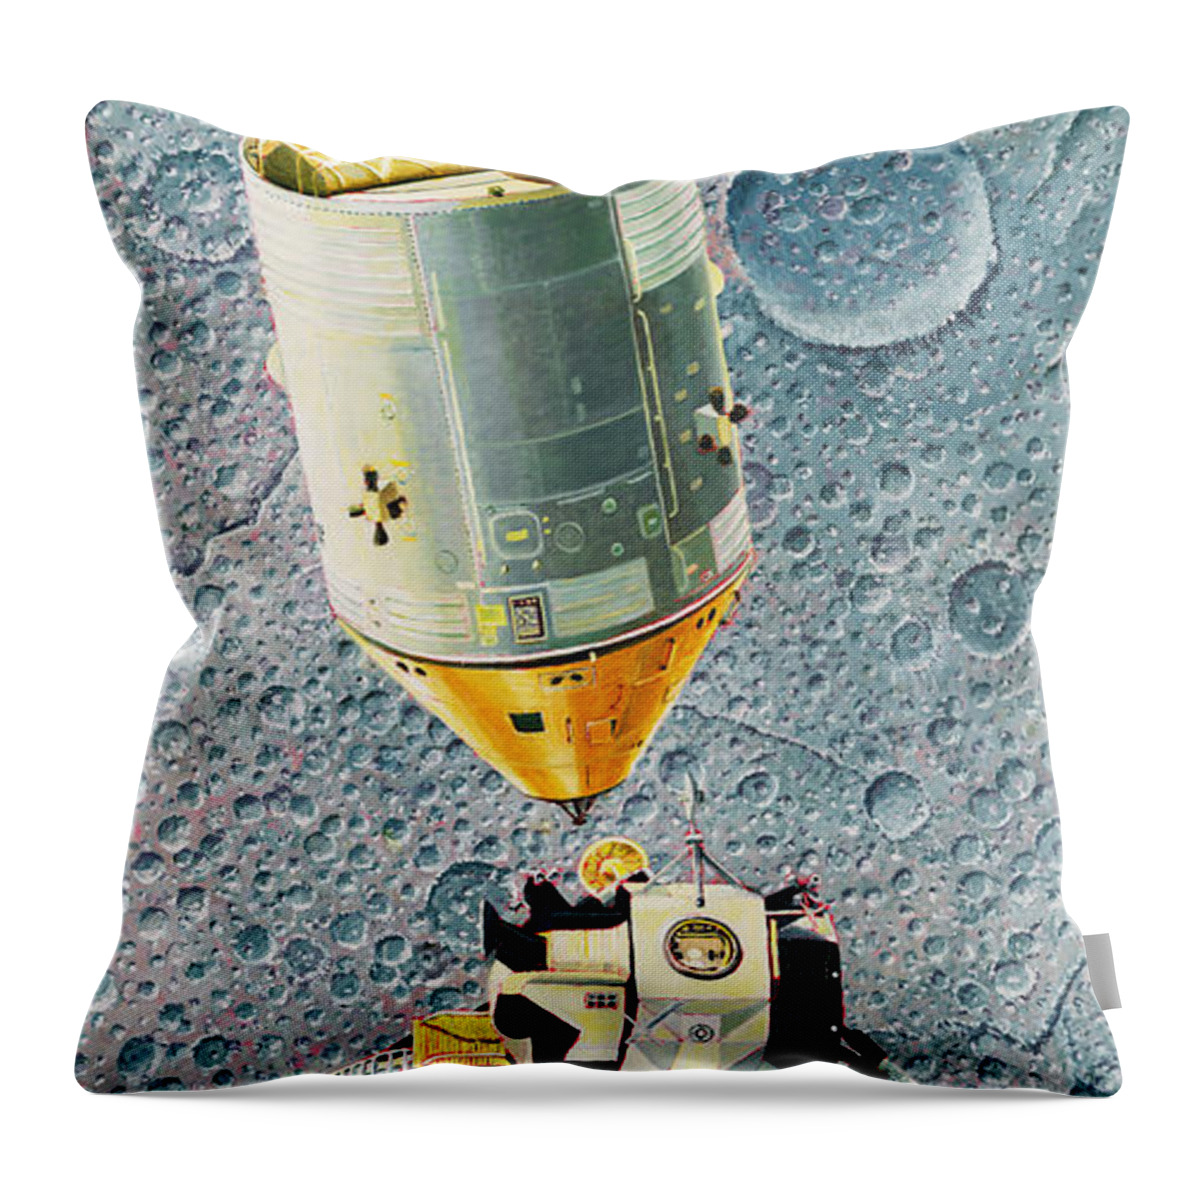 Space Throw Pillow featuring the painting Go For Landing by Douglas Castleman